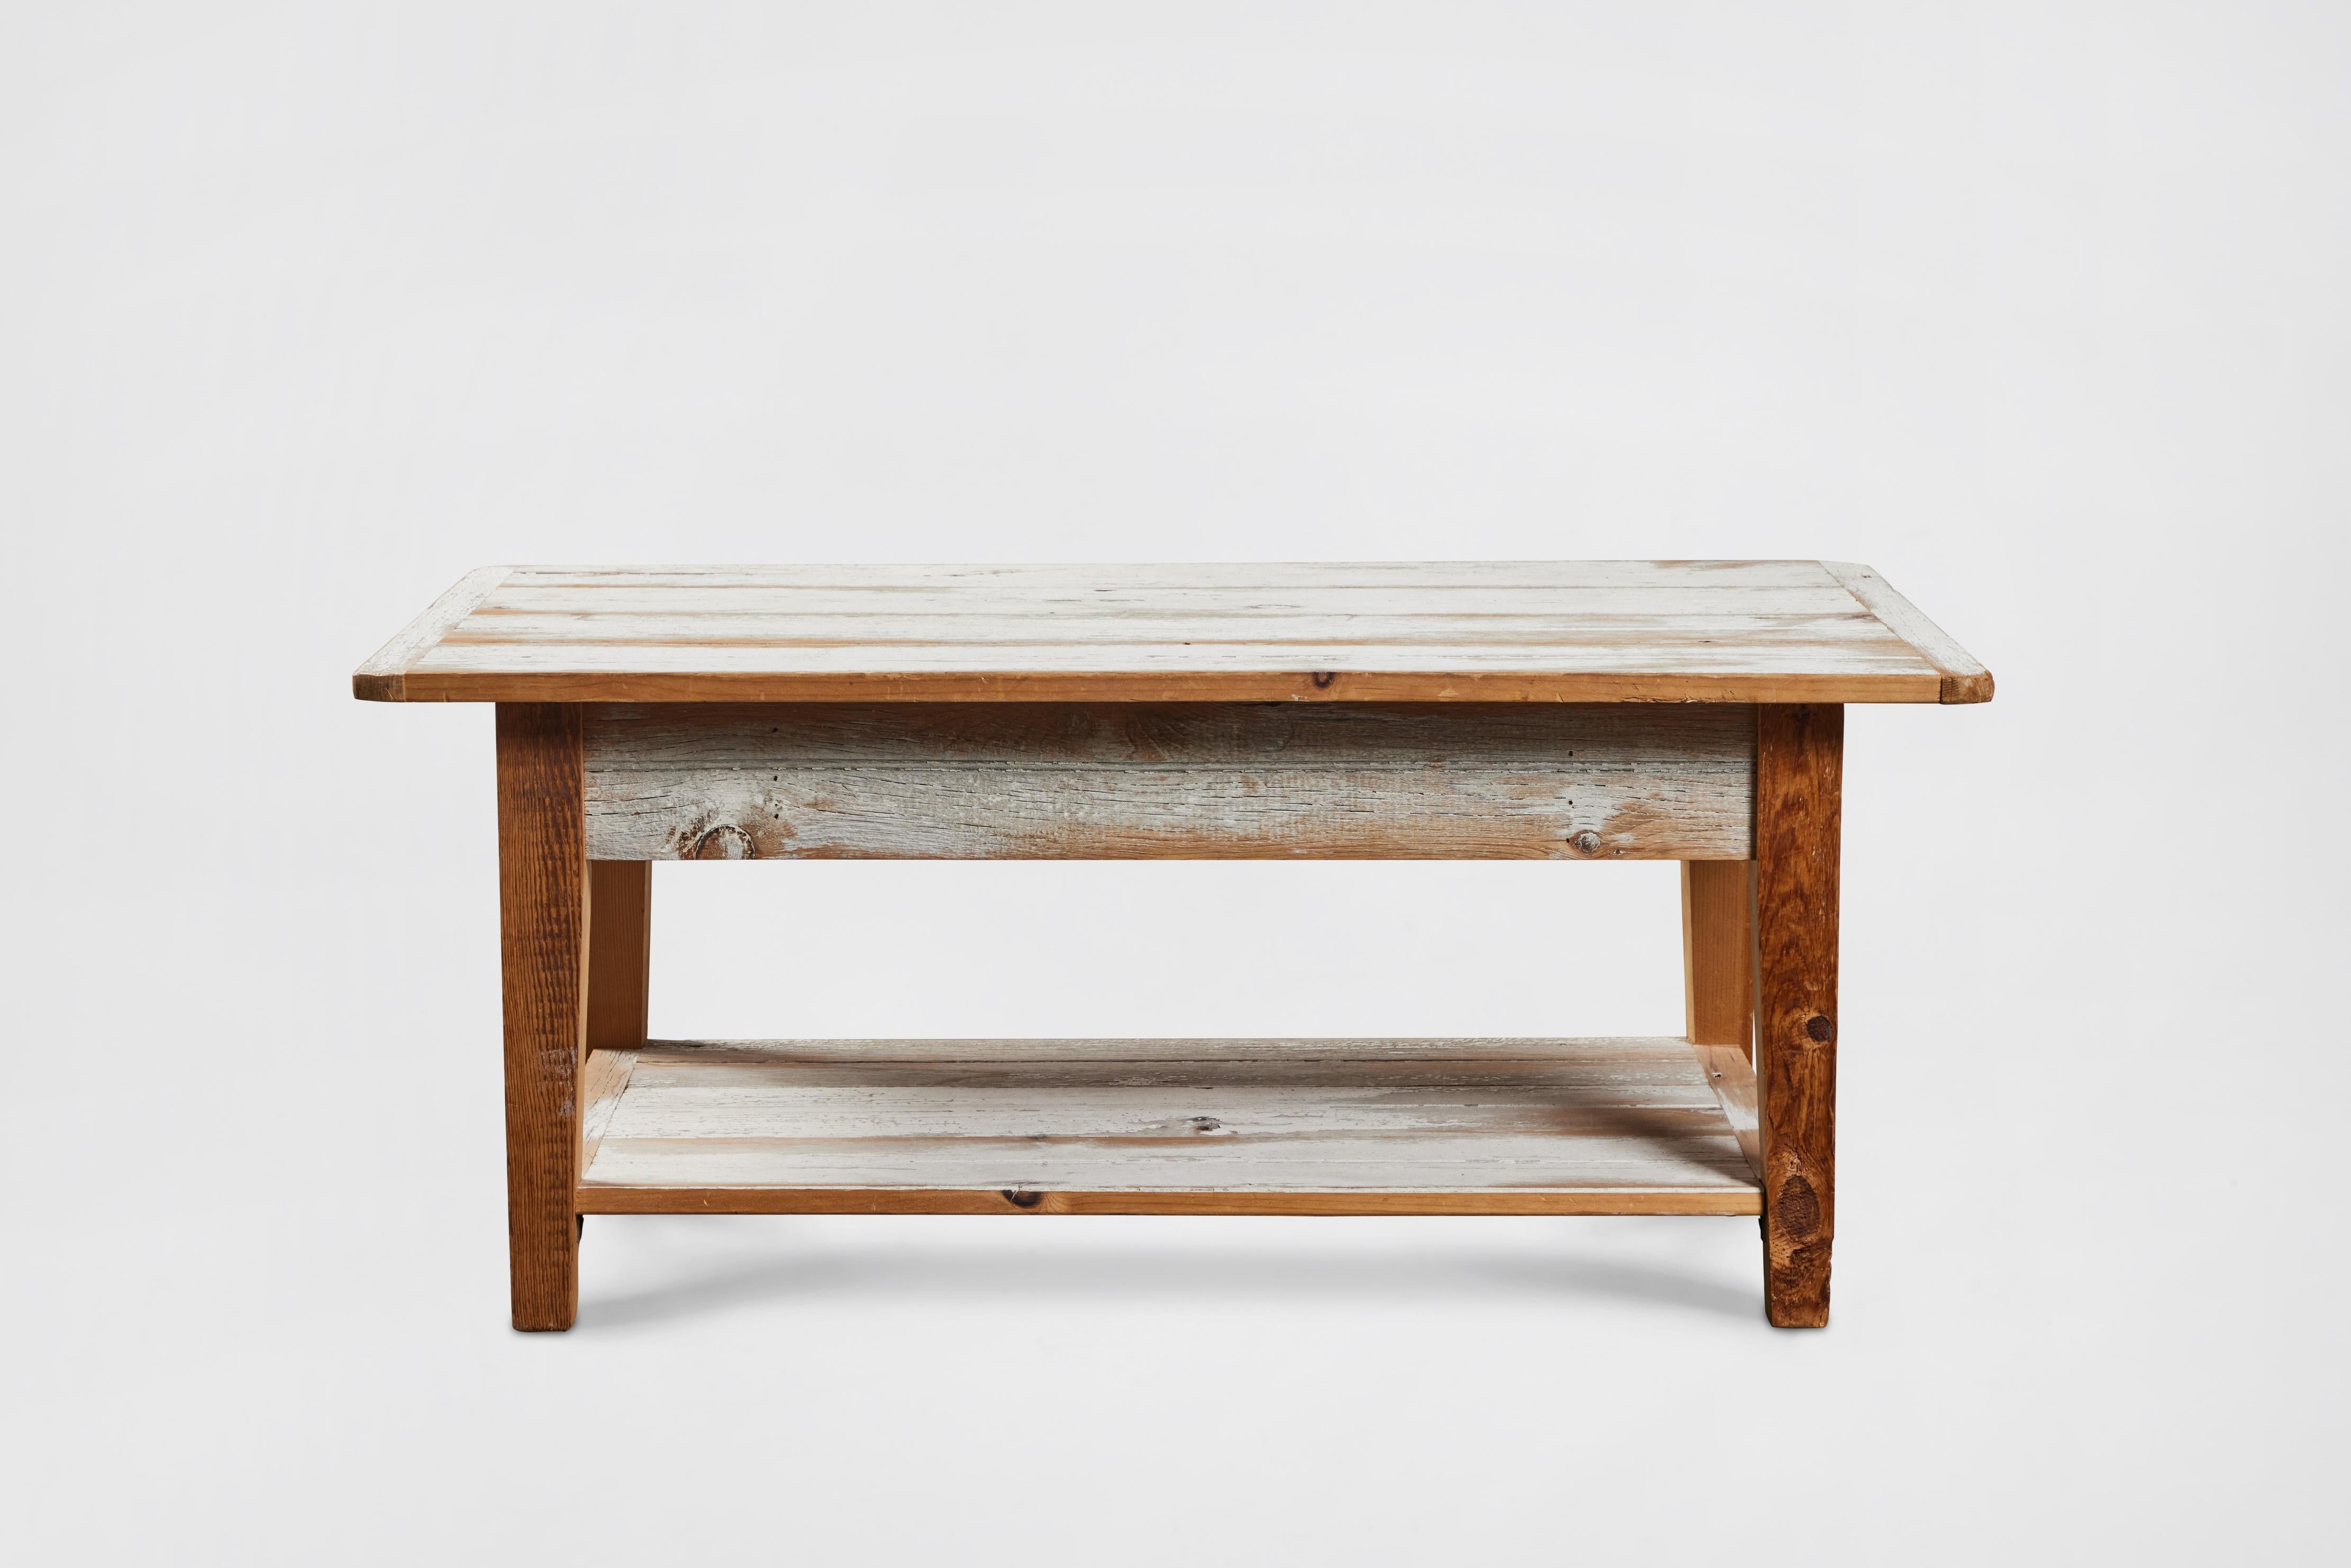 Rustic style, distressed-painted white oak coffee table. Made by John Hall Designs, Los Angeles, 1990. 